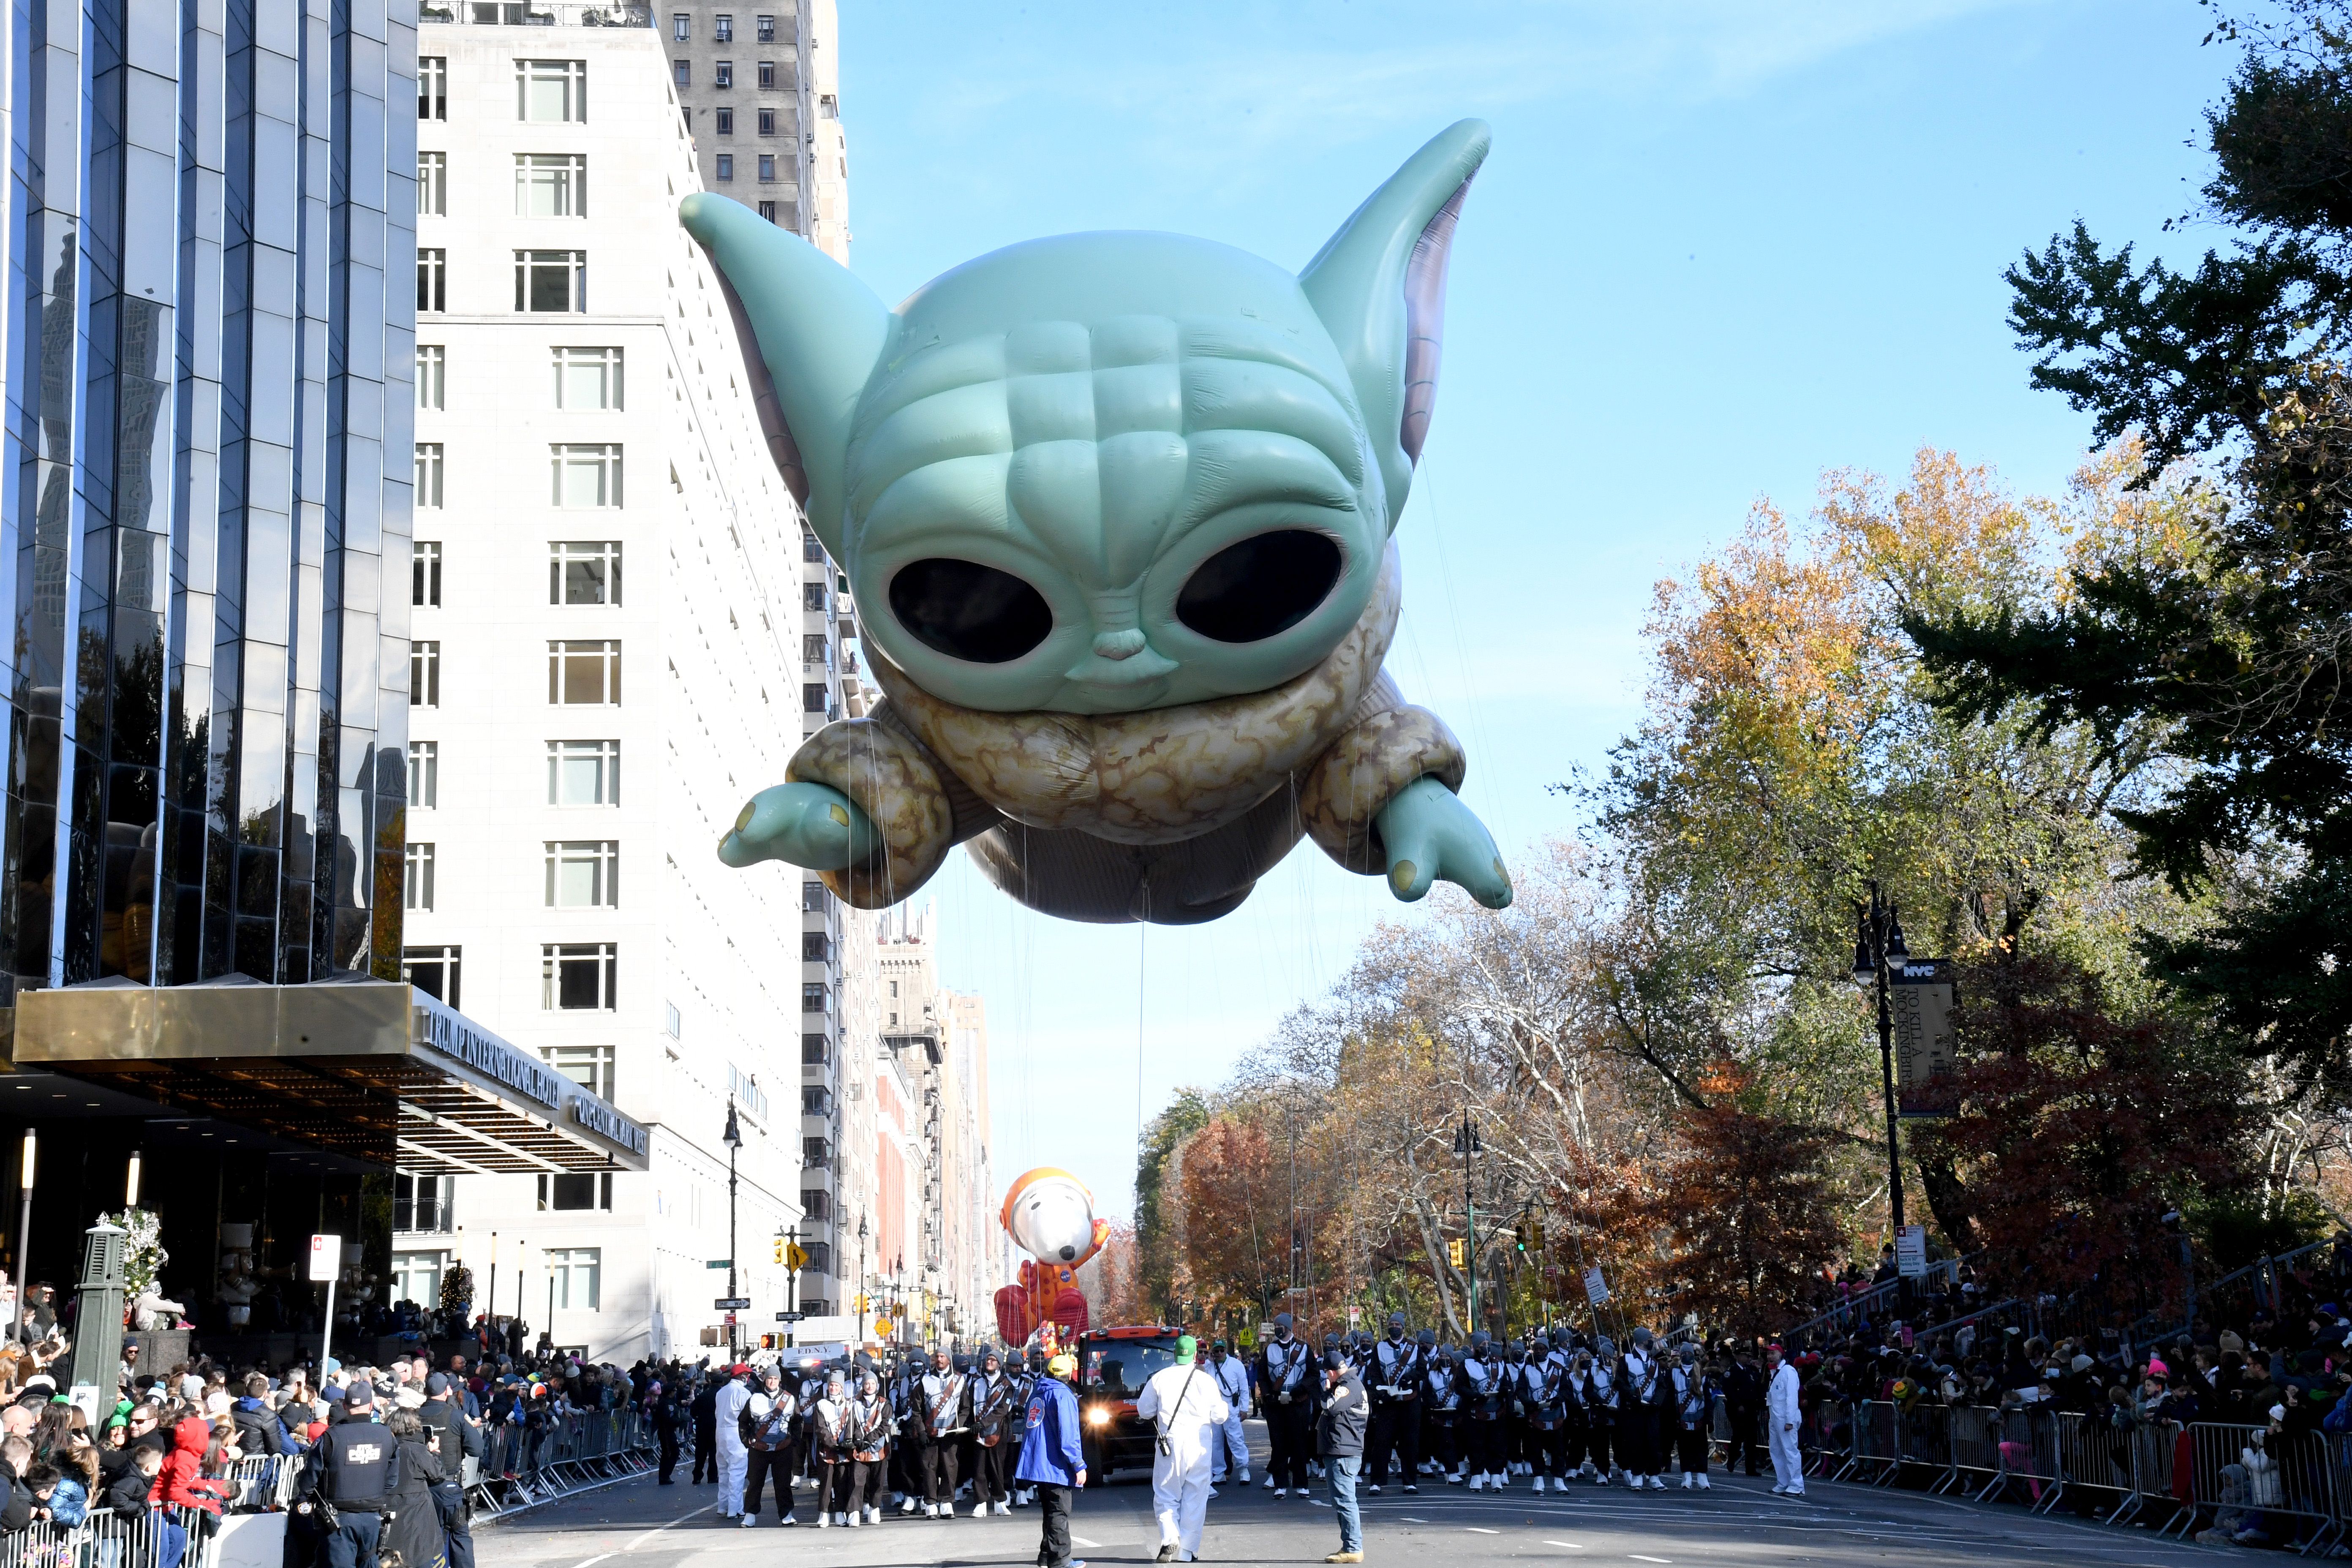 Star Wars' Grogu balloon during the 95th Macy's Thanksgiving Day Parade